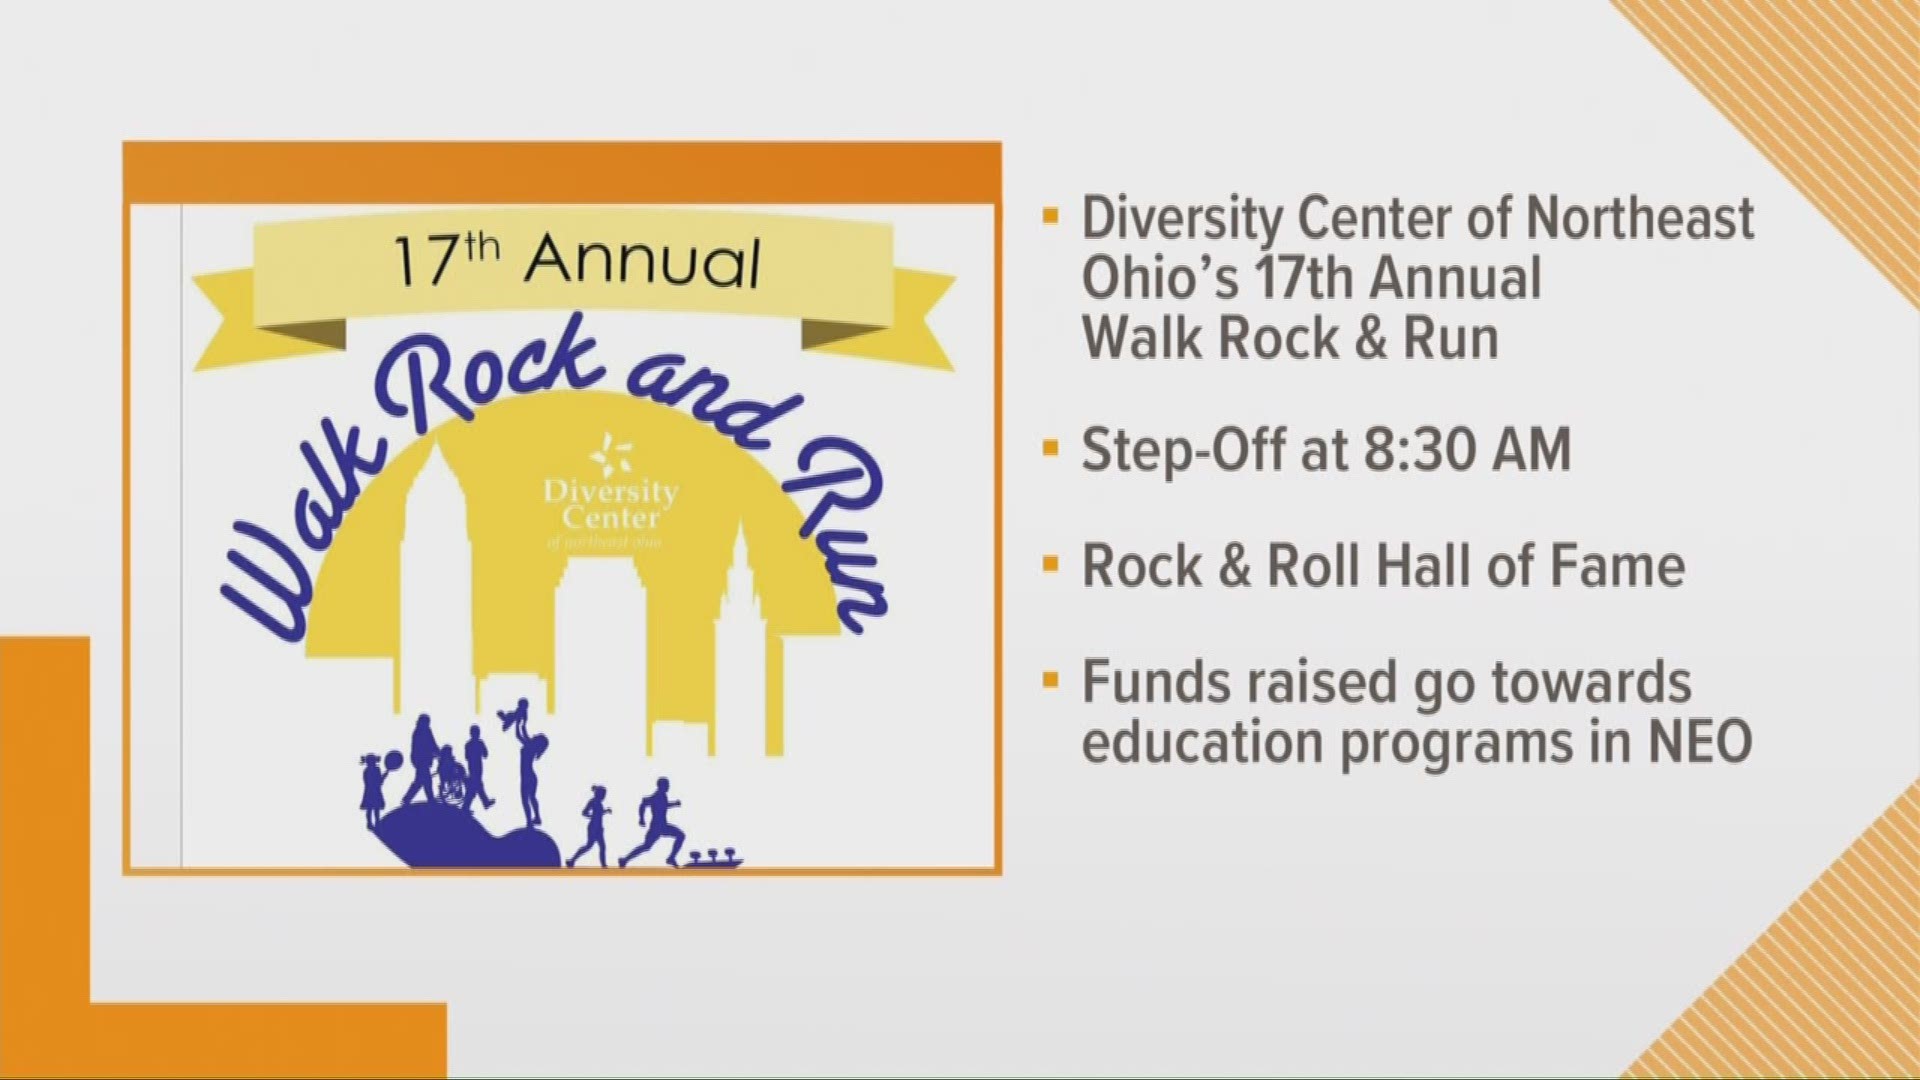 Michael and Lindsay speak to Peggy about the 17th Annual Diversity Walk, Rock and Run supporting education programs for Northeast Ohio.